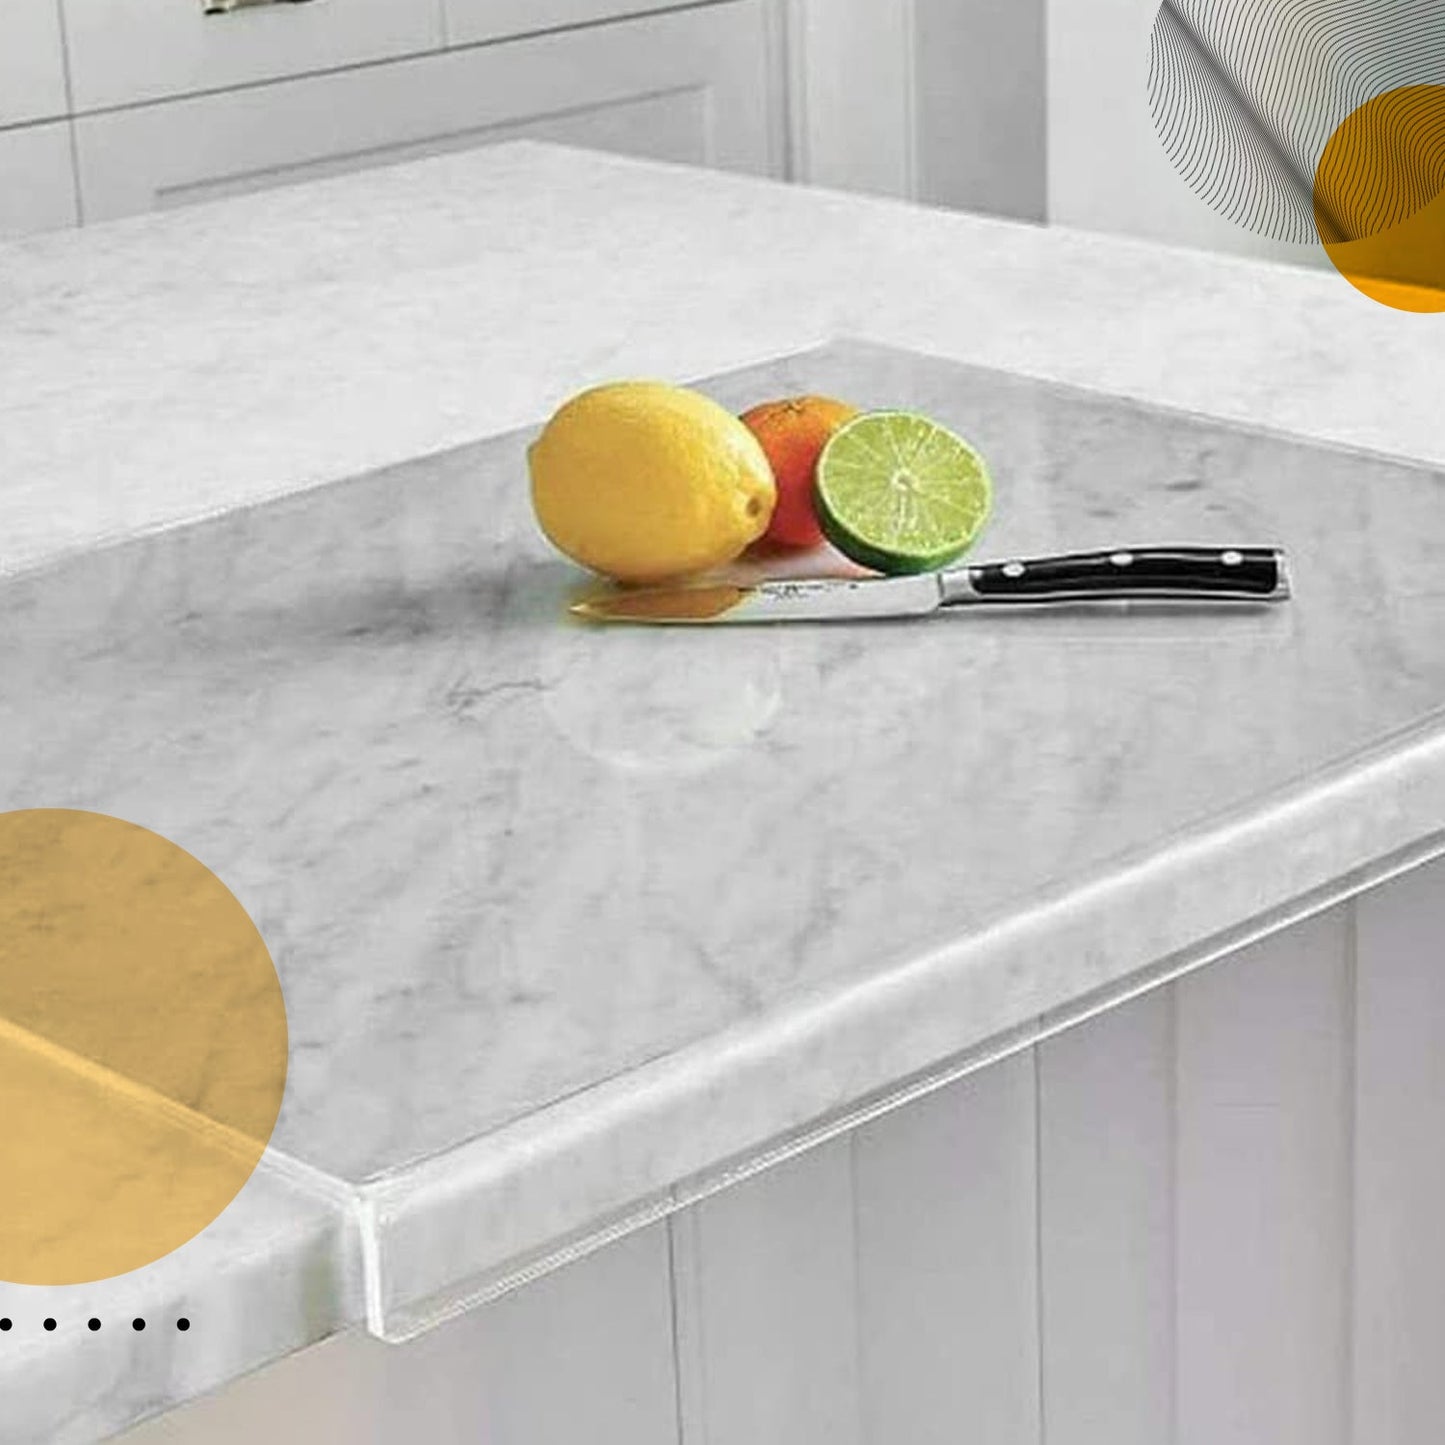 45x35 cm Acrylic Clear Cutting Board with Counter Lip for Kitchen Countertop Non Slip, Upgraded Thicker Large Cutting Board for Countertop Protector